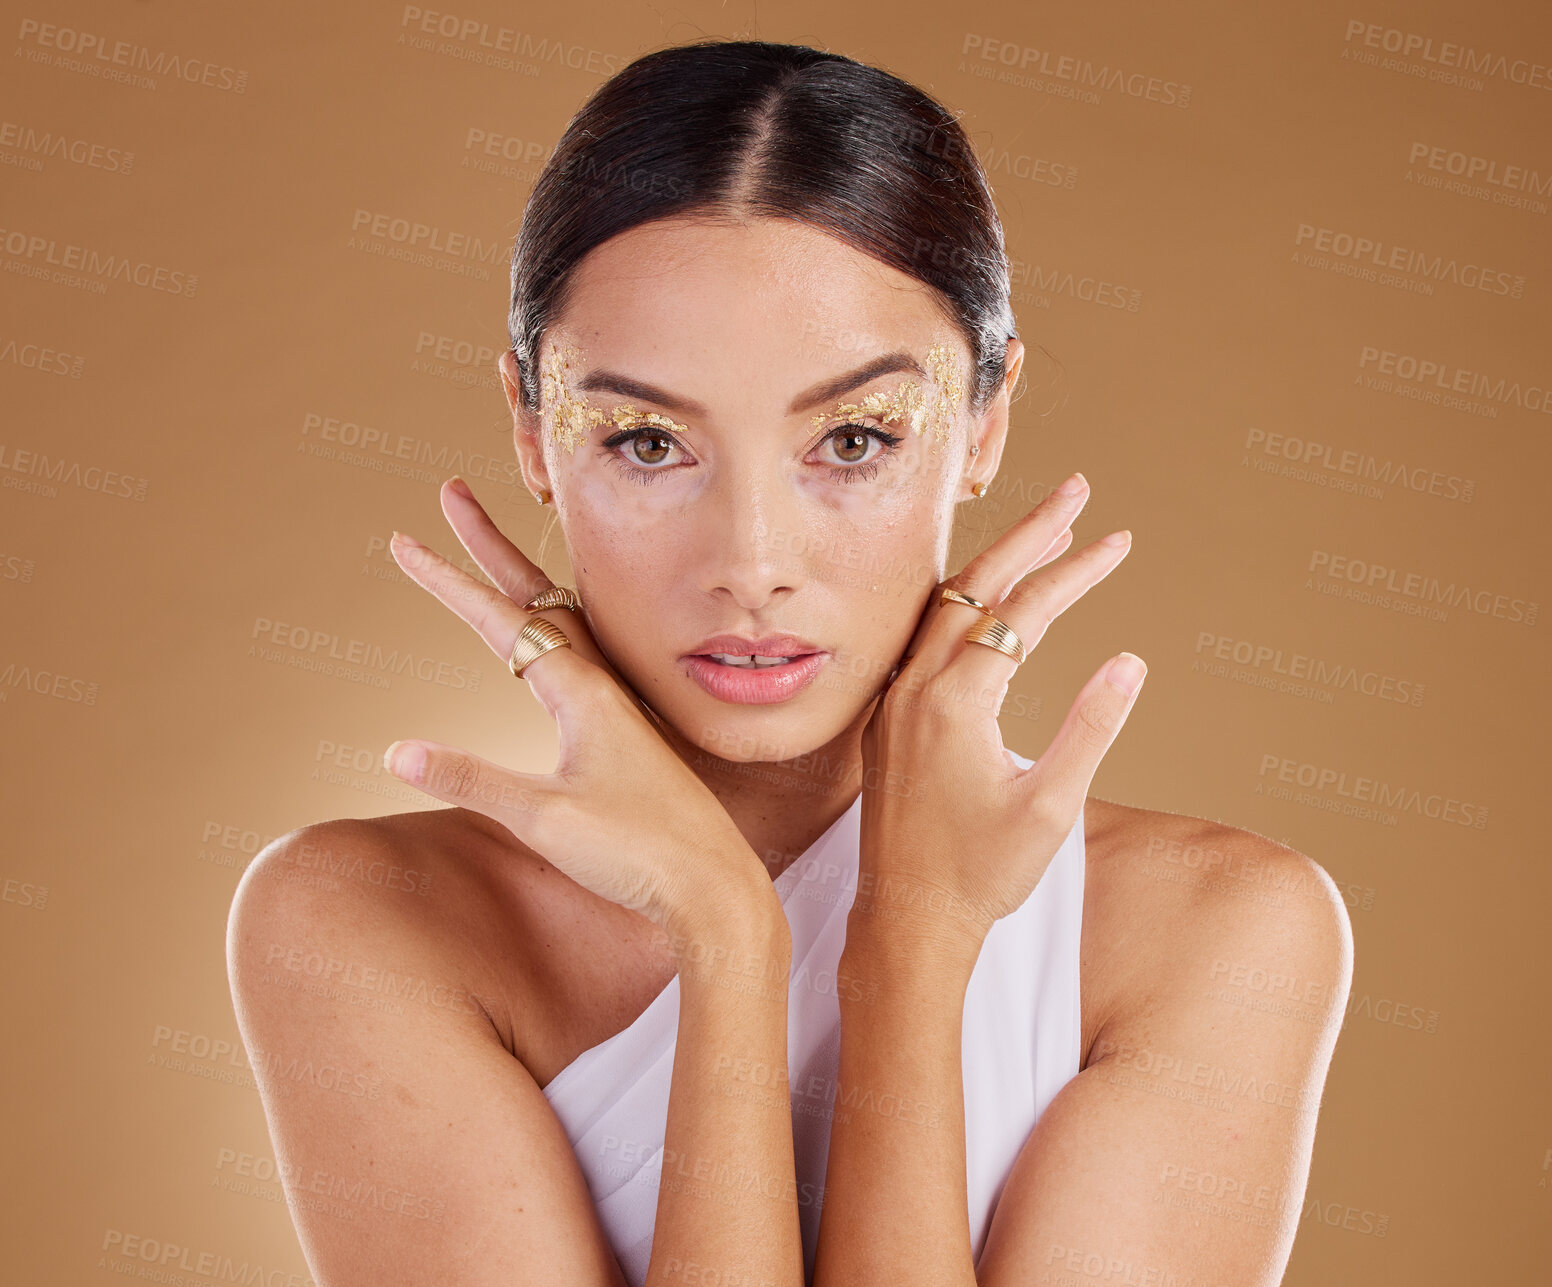 Buy stock photo Gold portrait, glitter makeup or woman with luxury eyeshadow, cosmetics product and skincare glow. Beauty girl, spa salon or aesthetic model face with jewelry ring, accessories or vitiligo healthcare